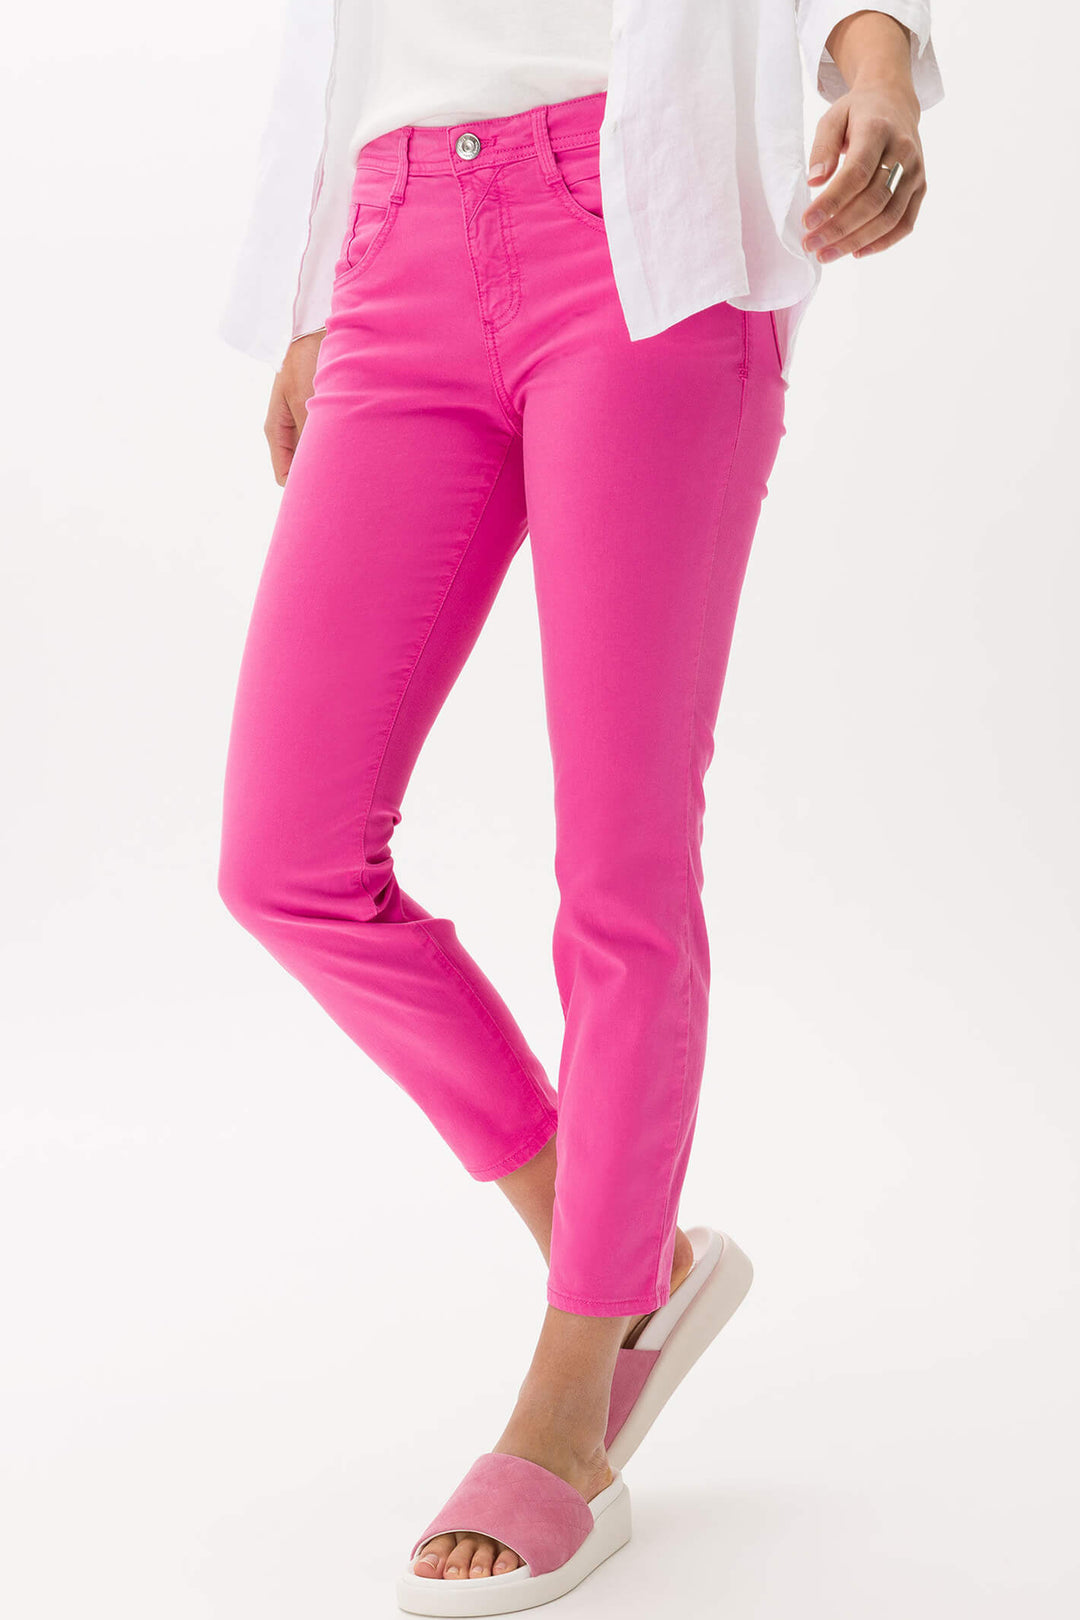 Brax 71-7948 85 Shakira S Flush Pink Free To Move Skinny Fit Jeans - Shirley Allum Boutique